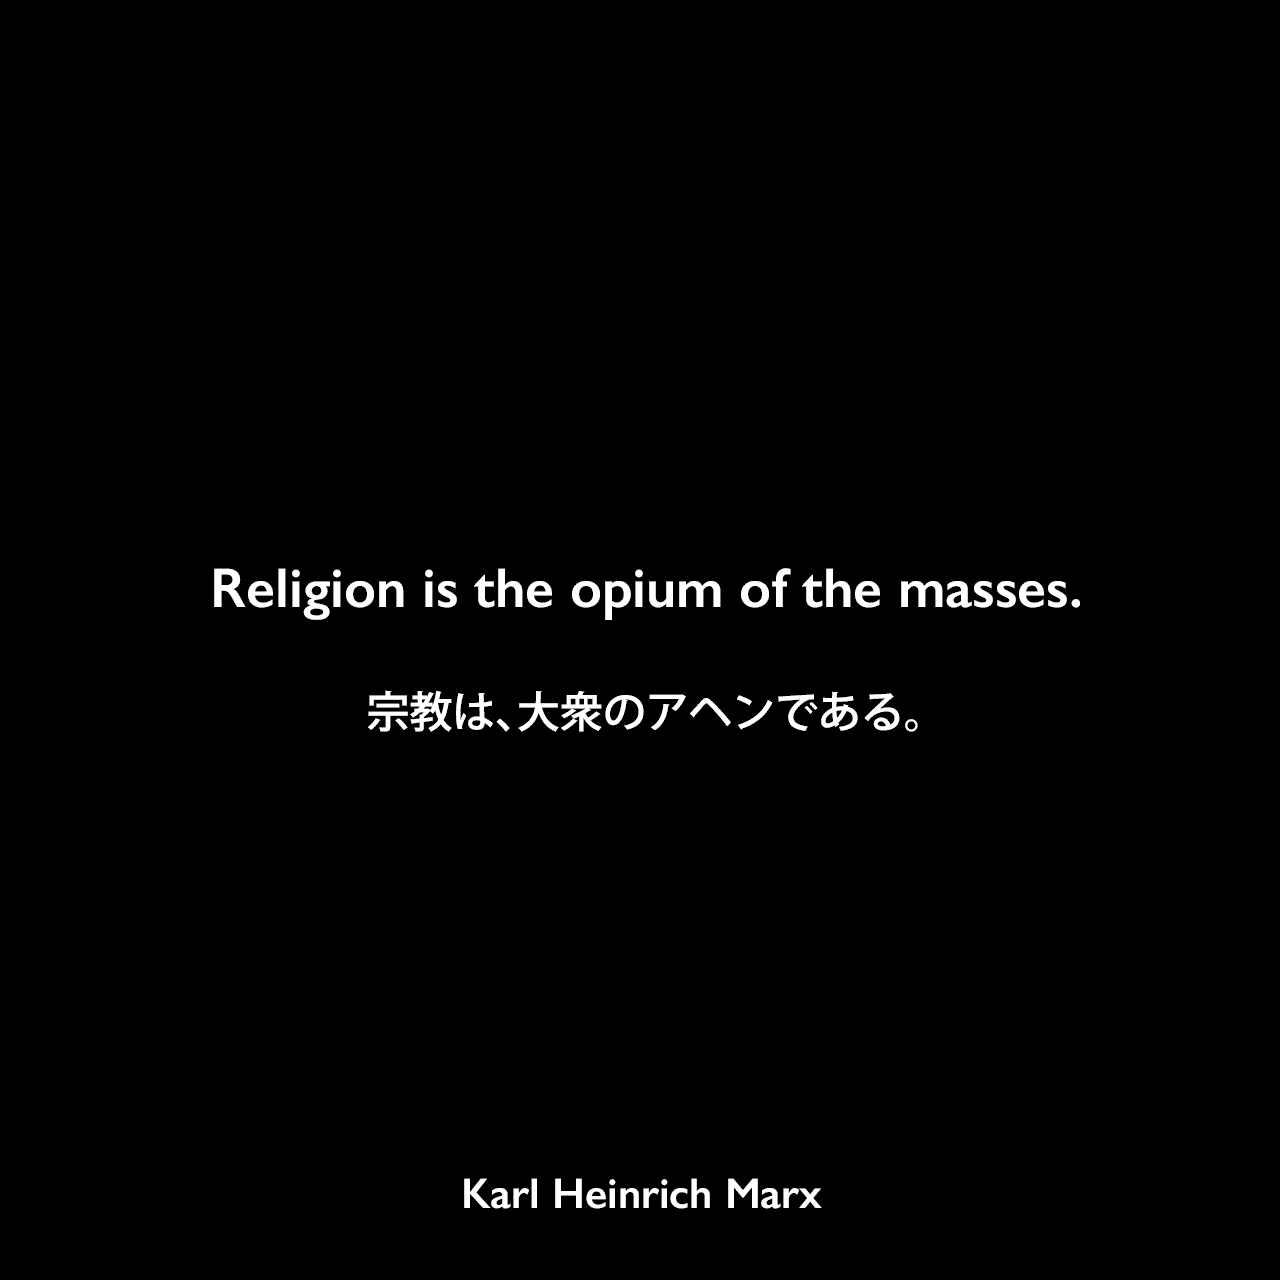 Religion is the opium of the masses.宗教は、大衆のアヘンである。Karl Heinrich Marx